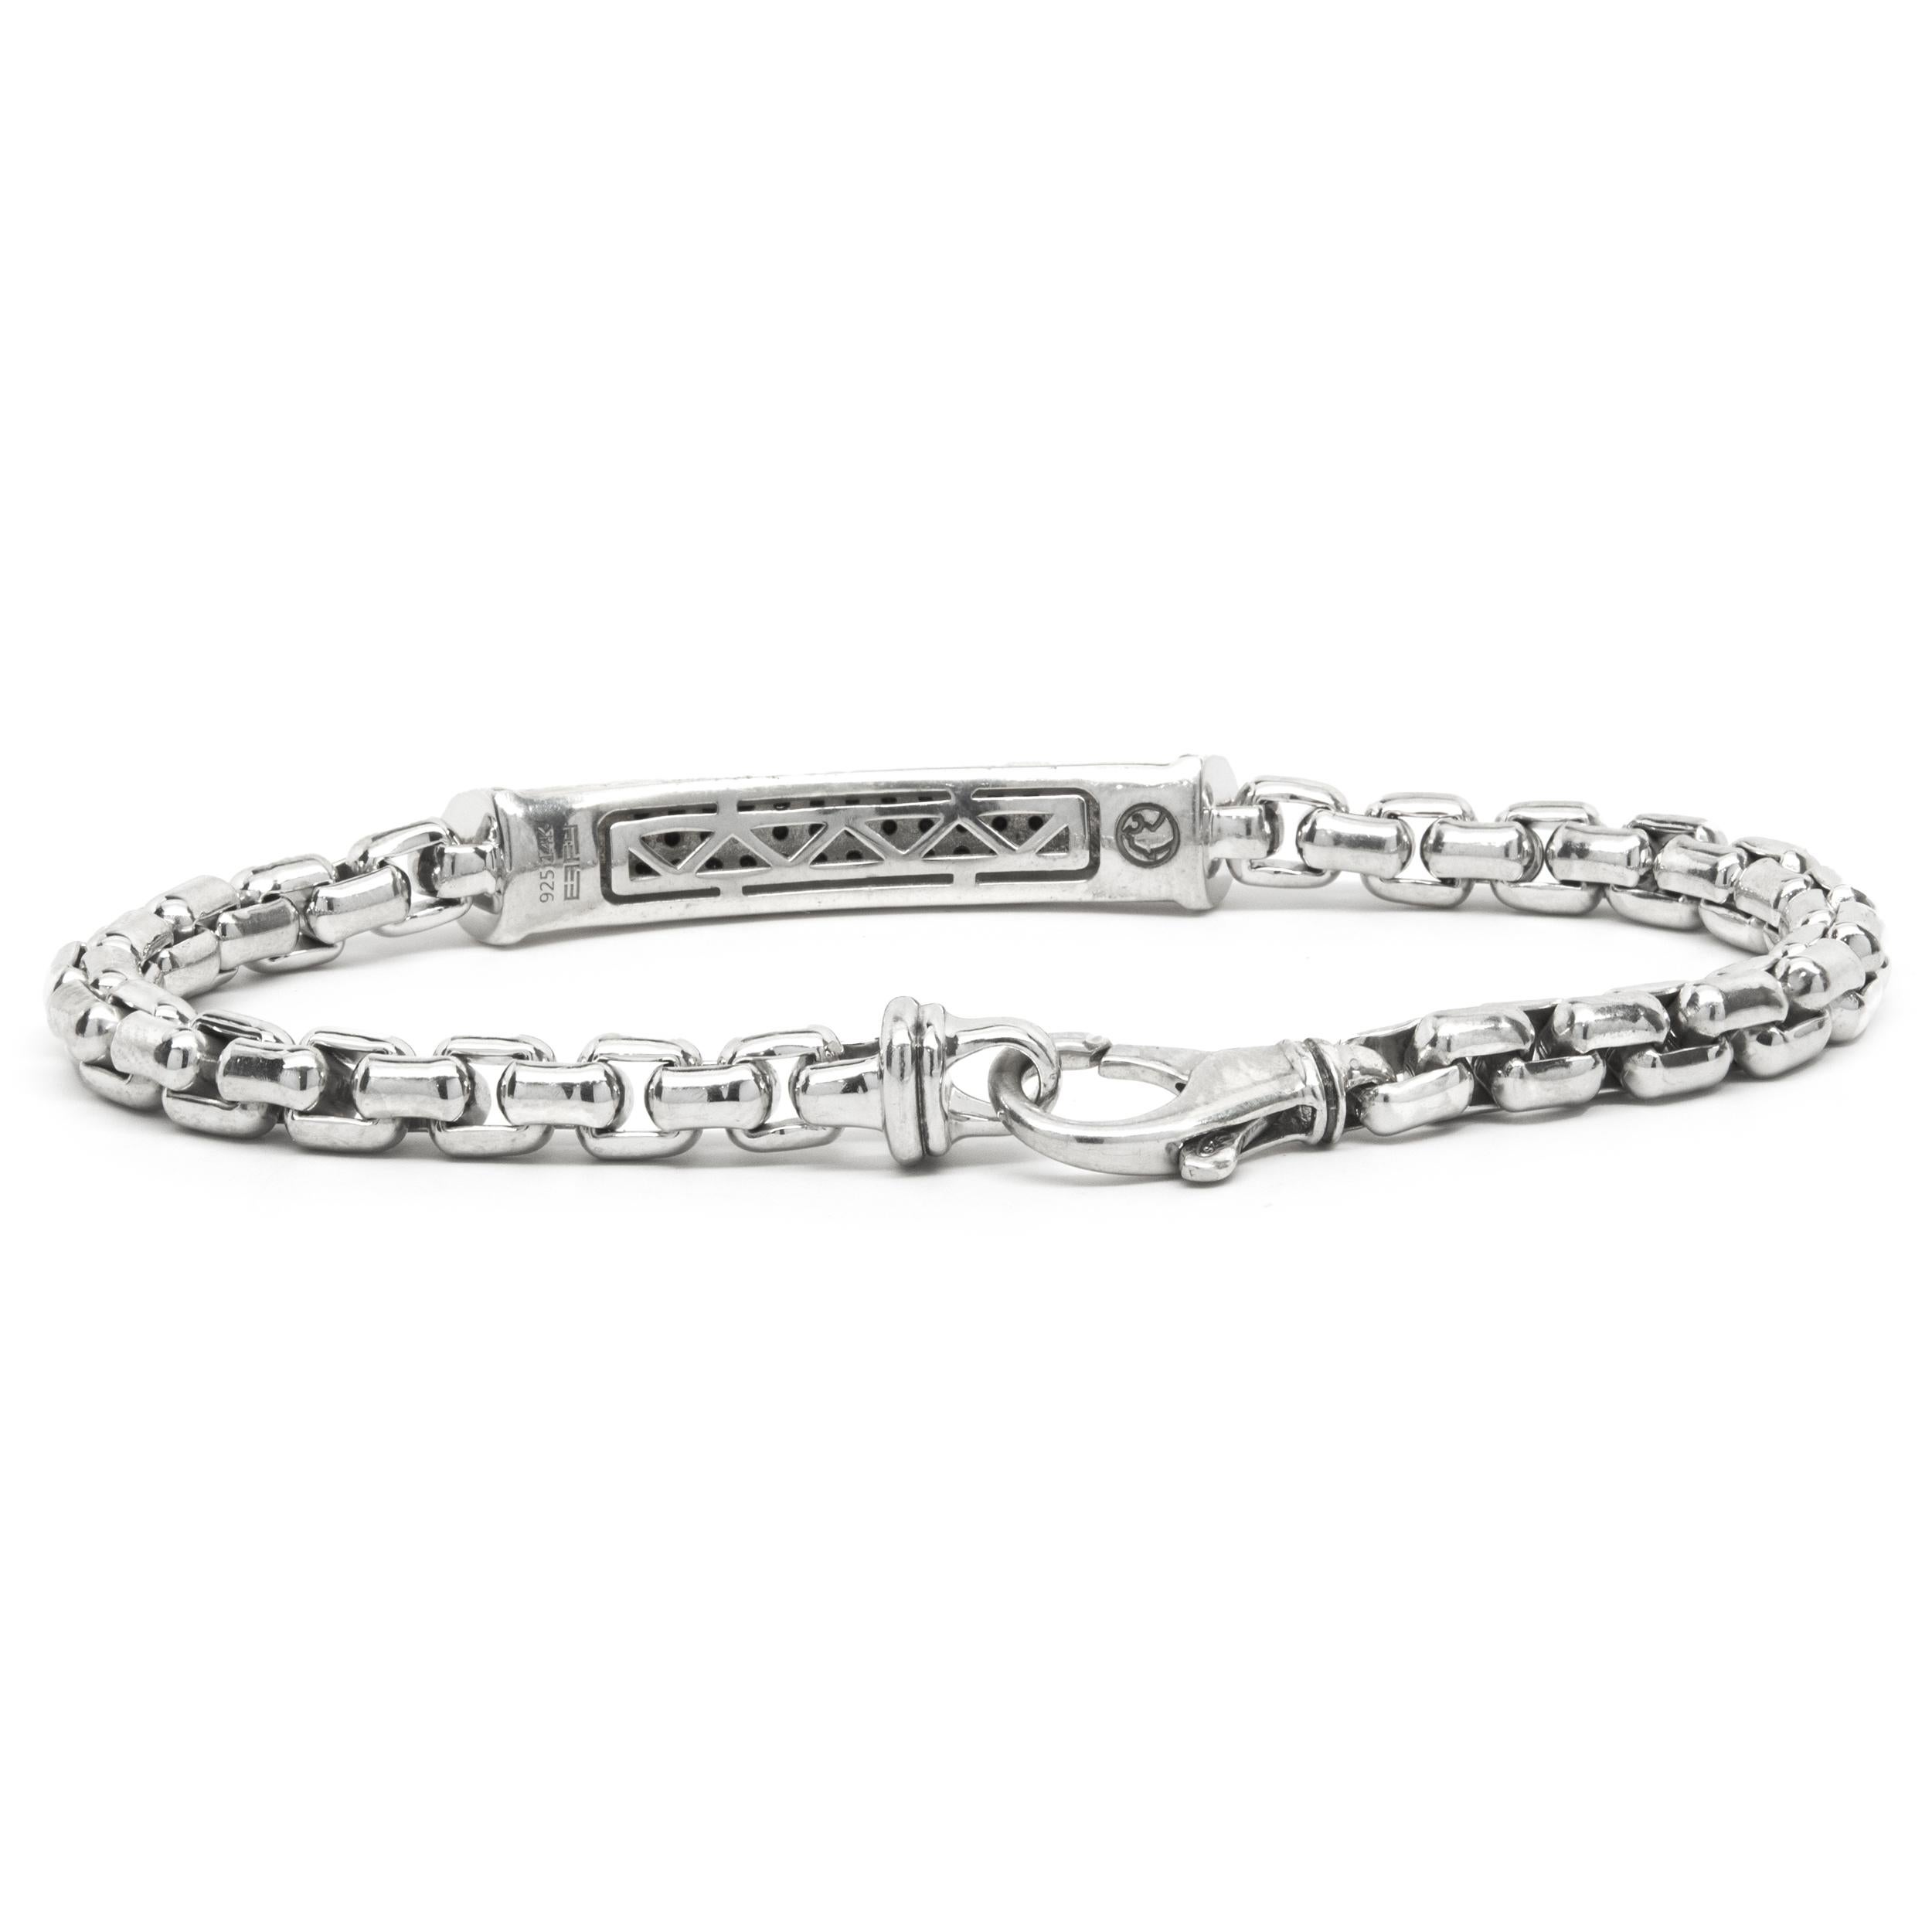 Designer:  Effy
Material: sterling silver
Weight: 37.28 grams
Dimensions: bracelet measures 9-inches in length
